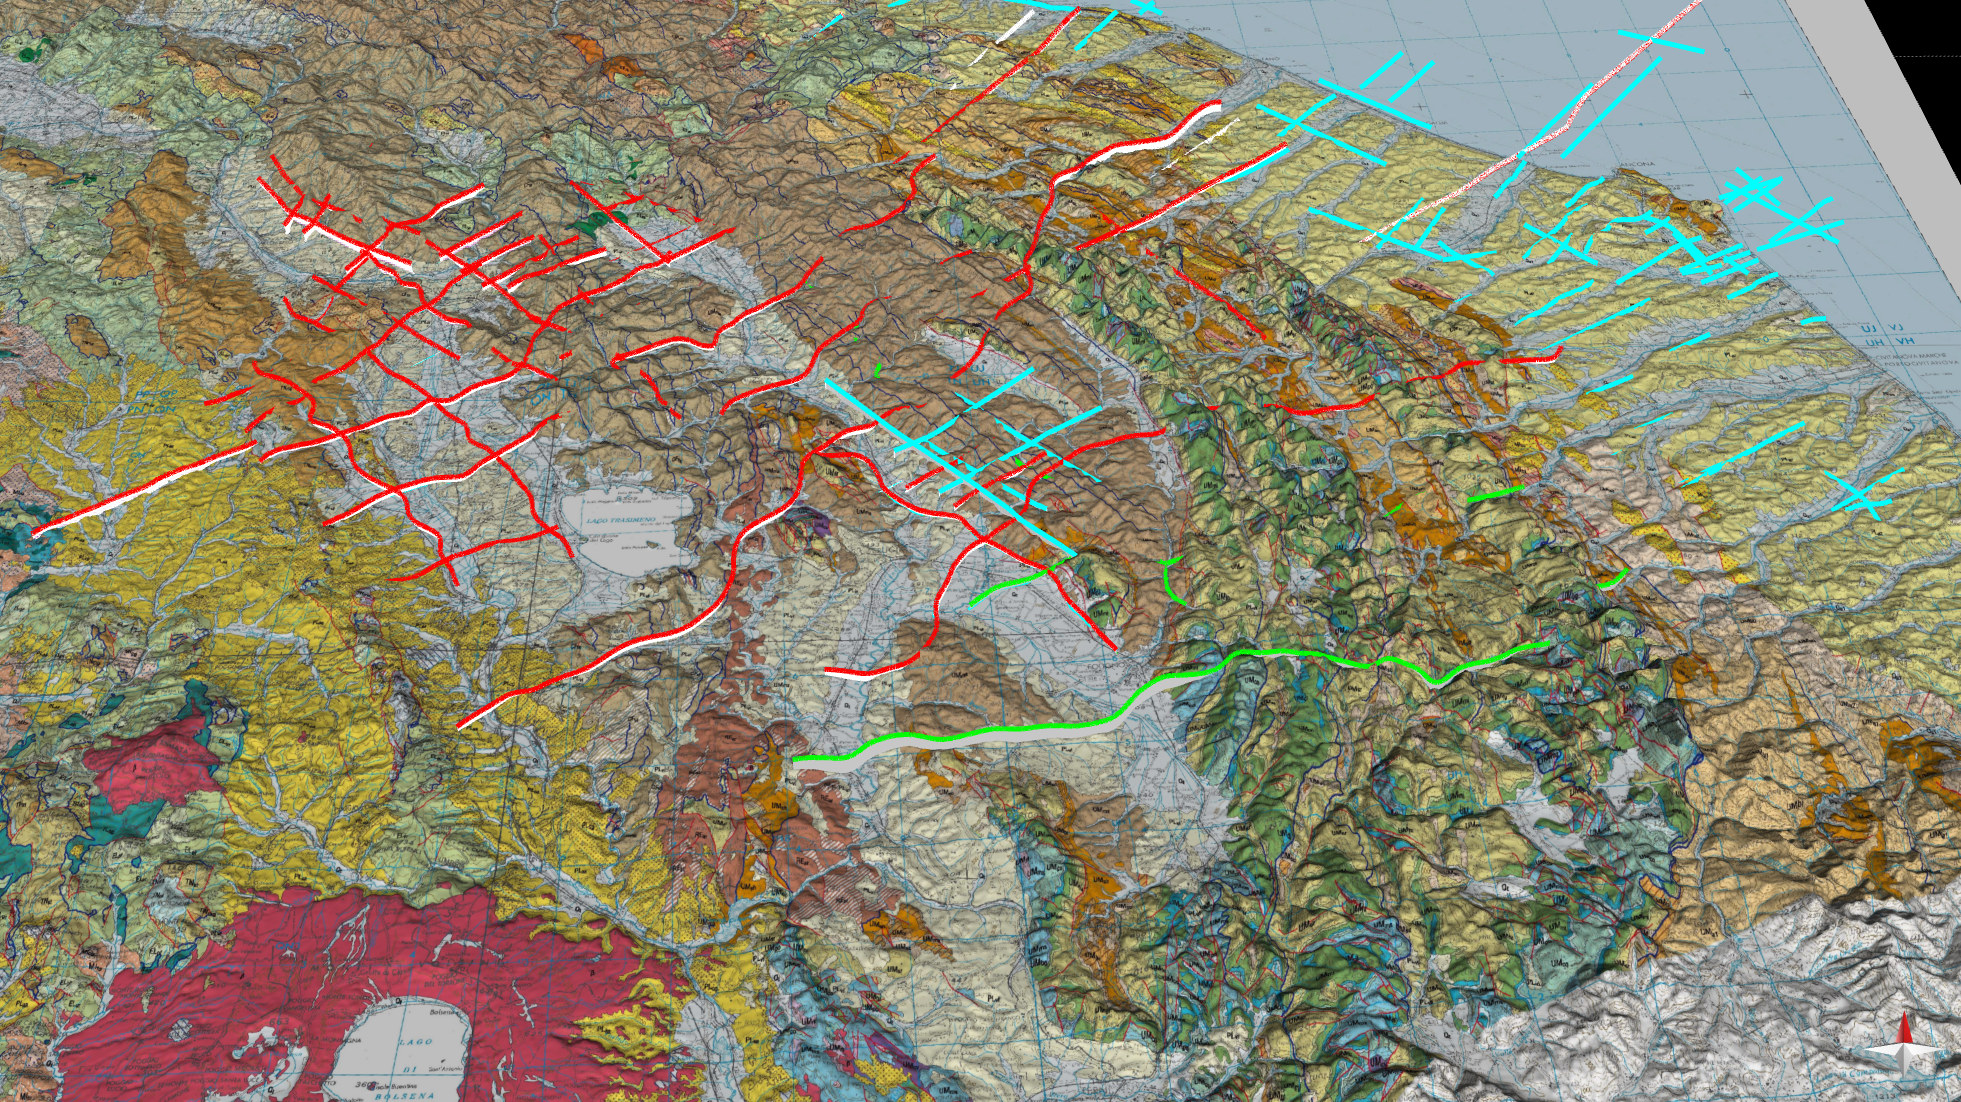 Geologica lmap with profile tracks